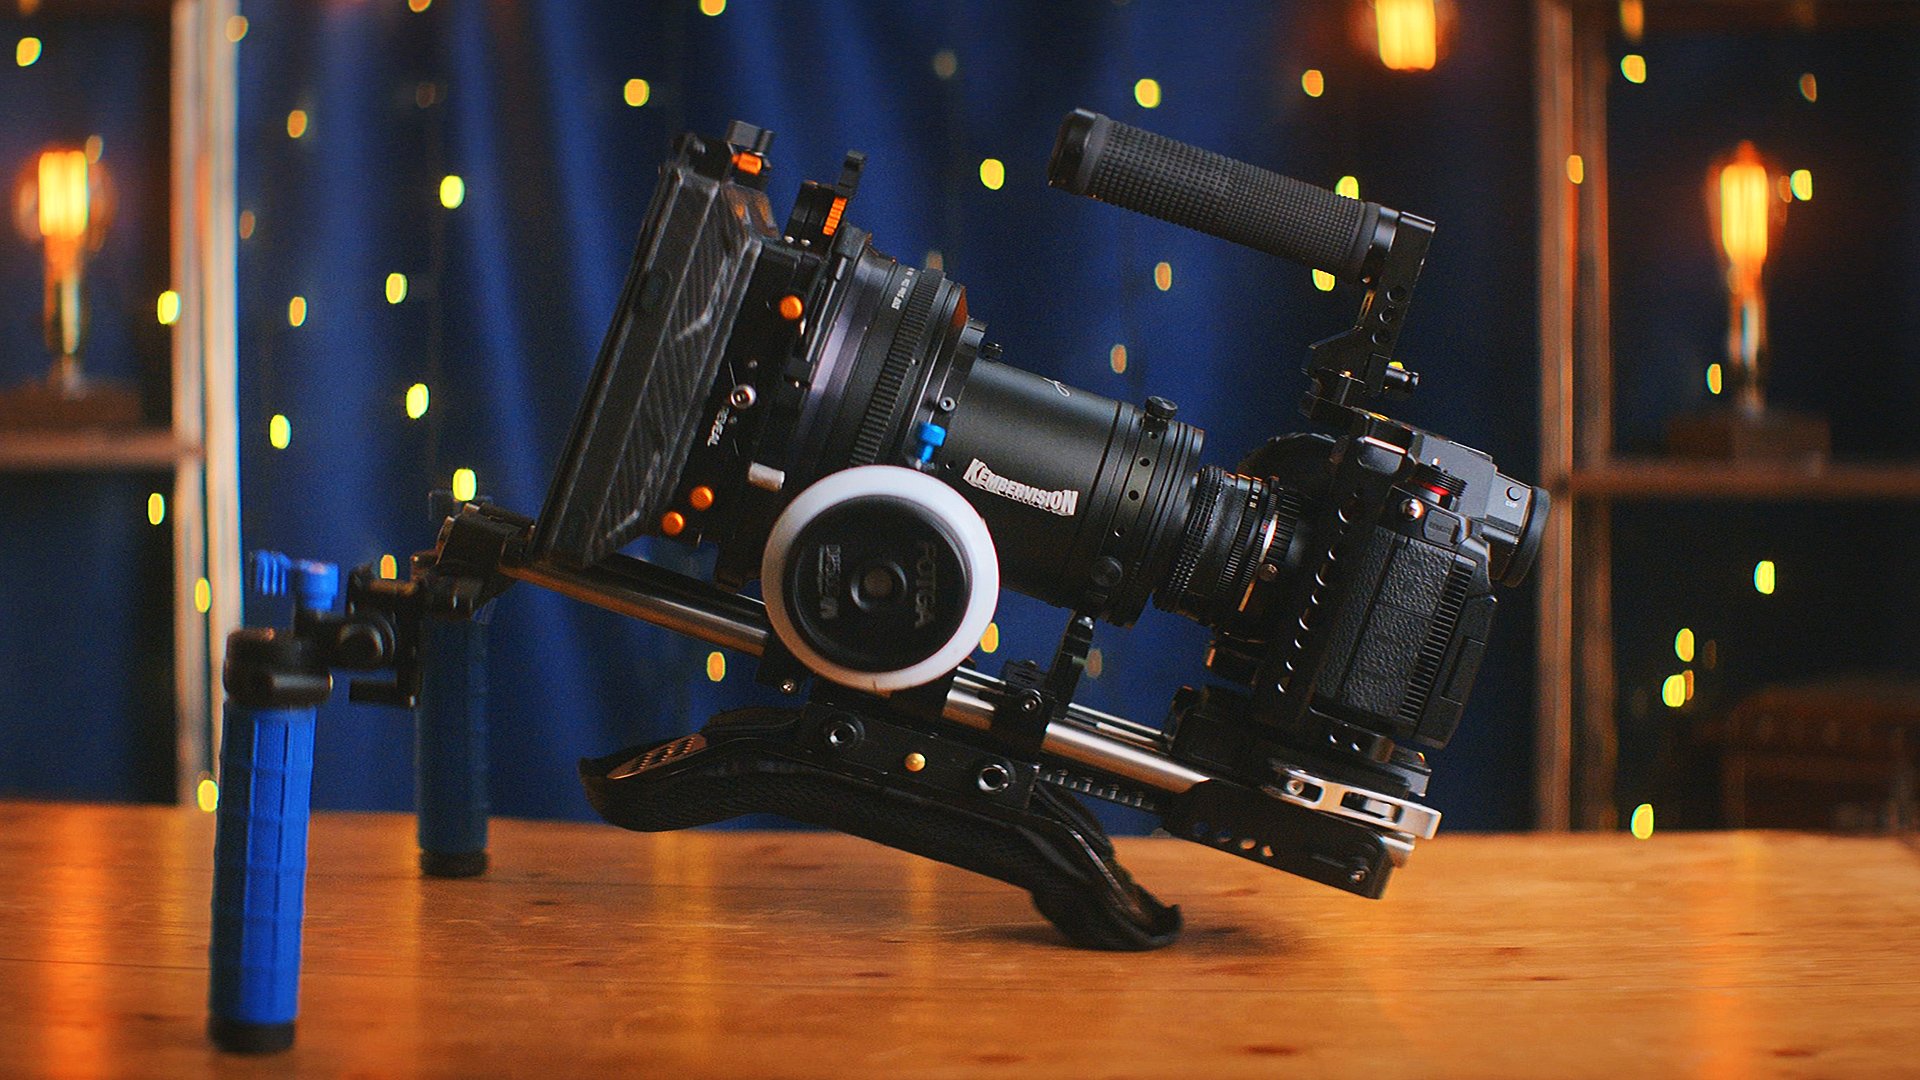 Yes, it is possible to make your own anamorphic lens for a fraction of the price of a 'real' one.